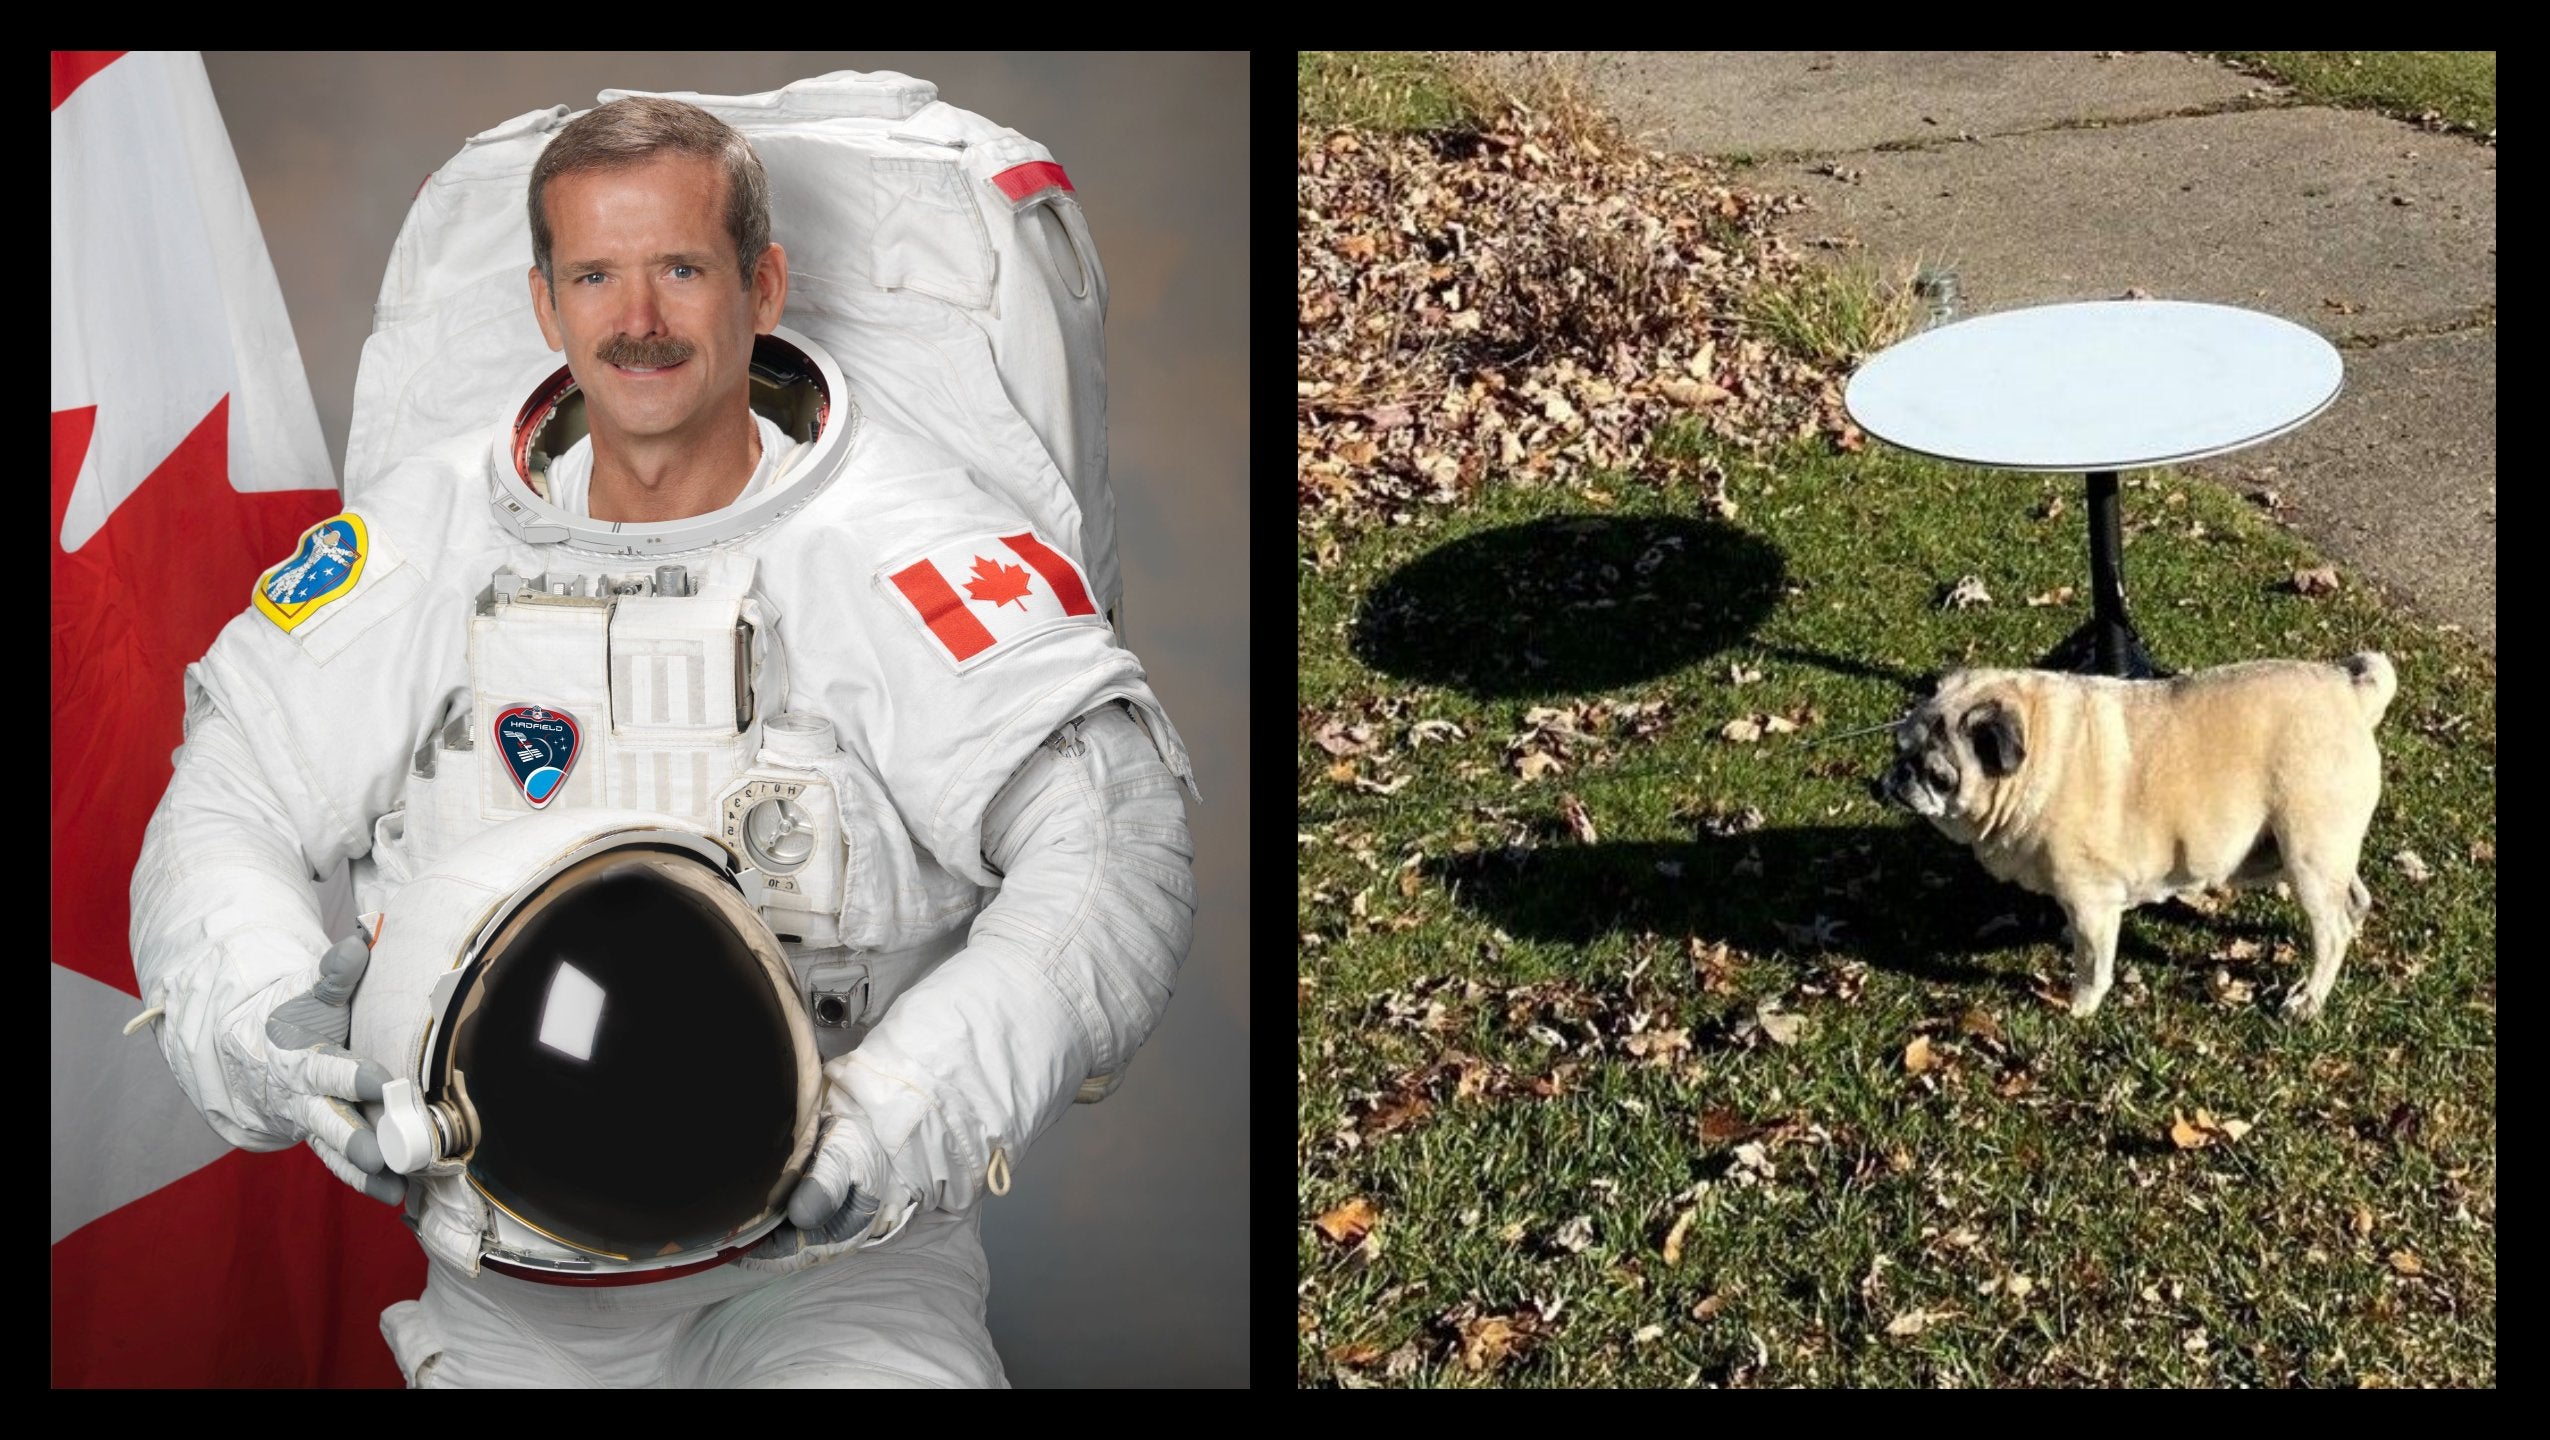 Former Canadian Astronaut is a SpaceX Starlink Internet Beta Tester